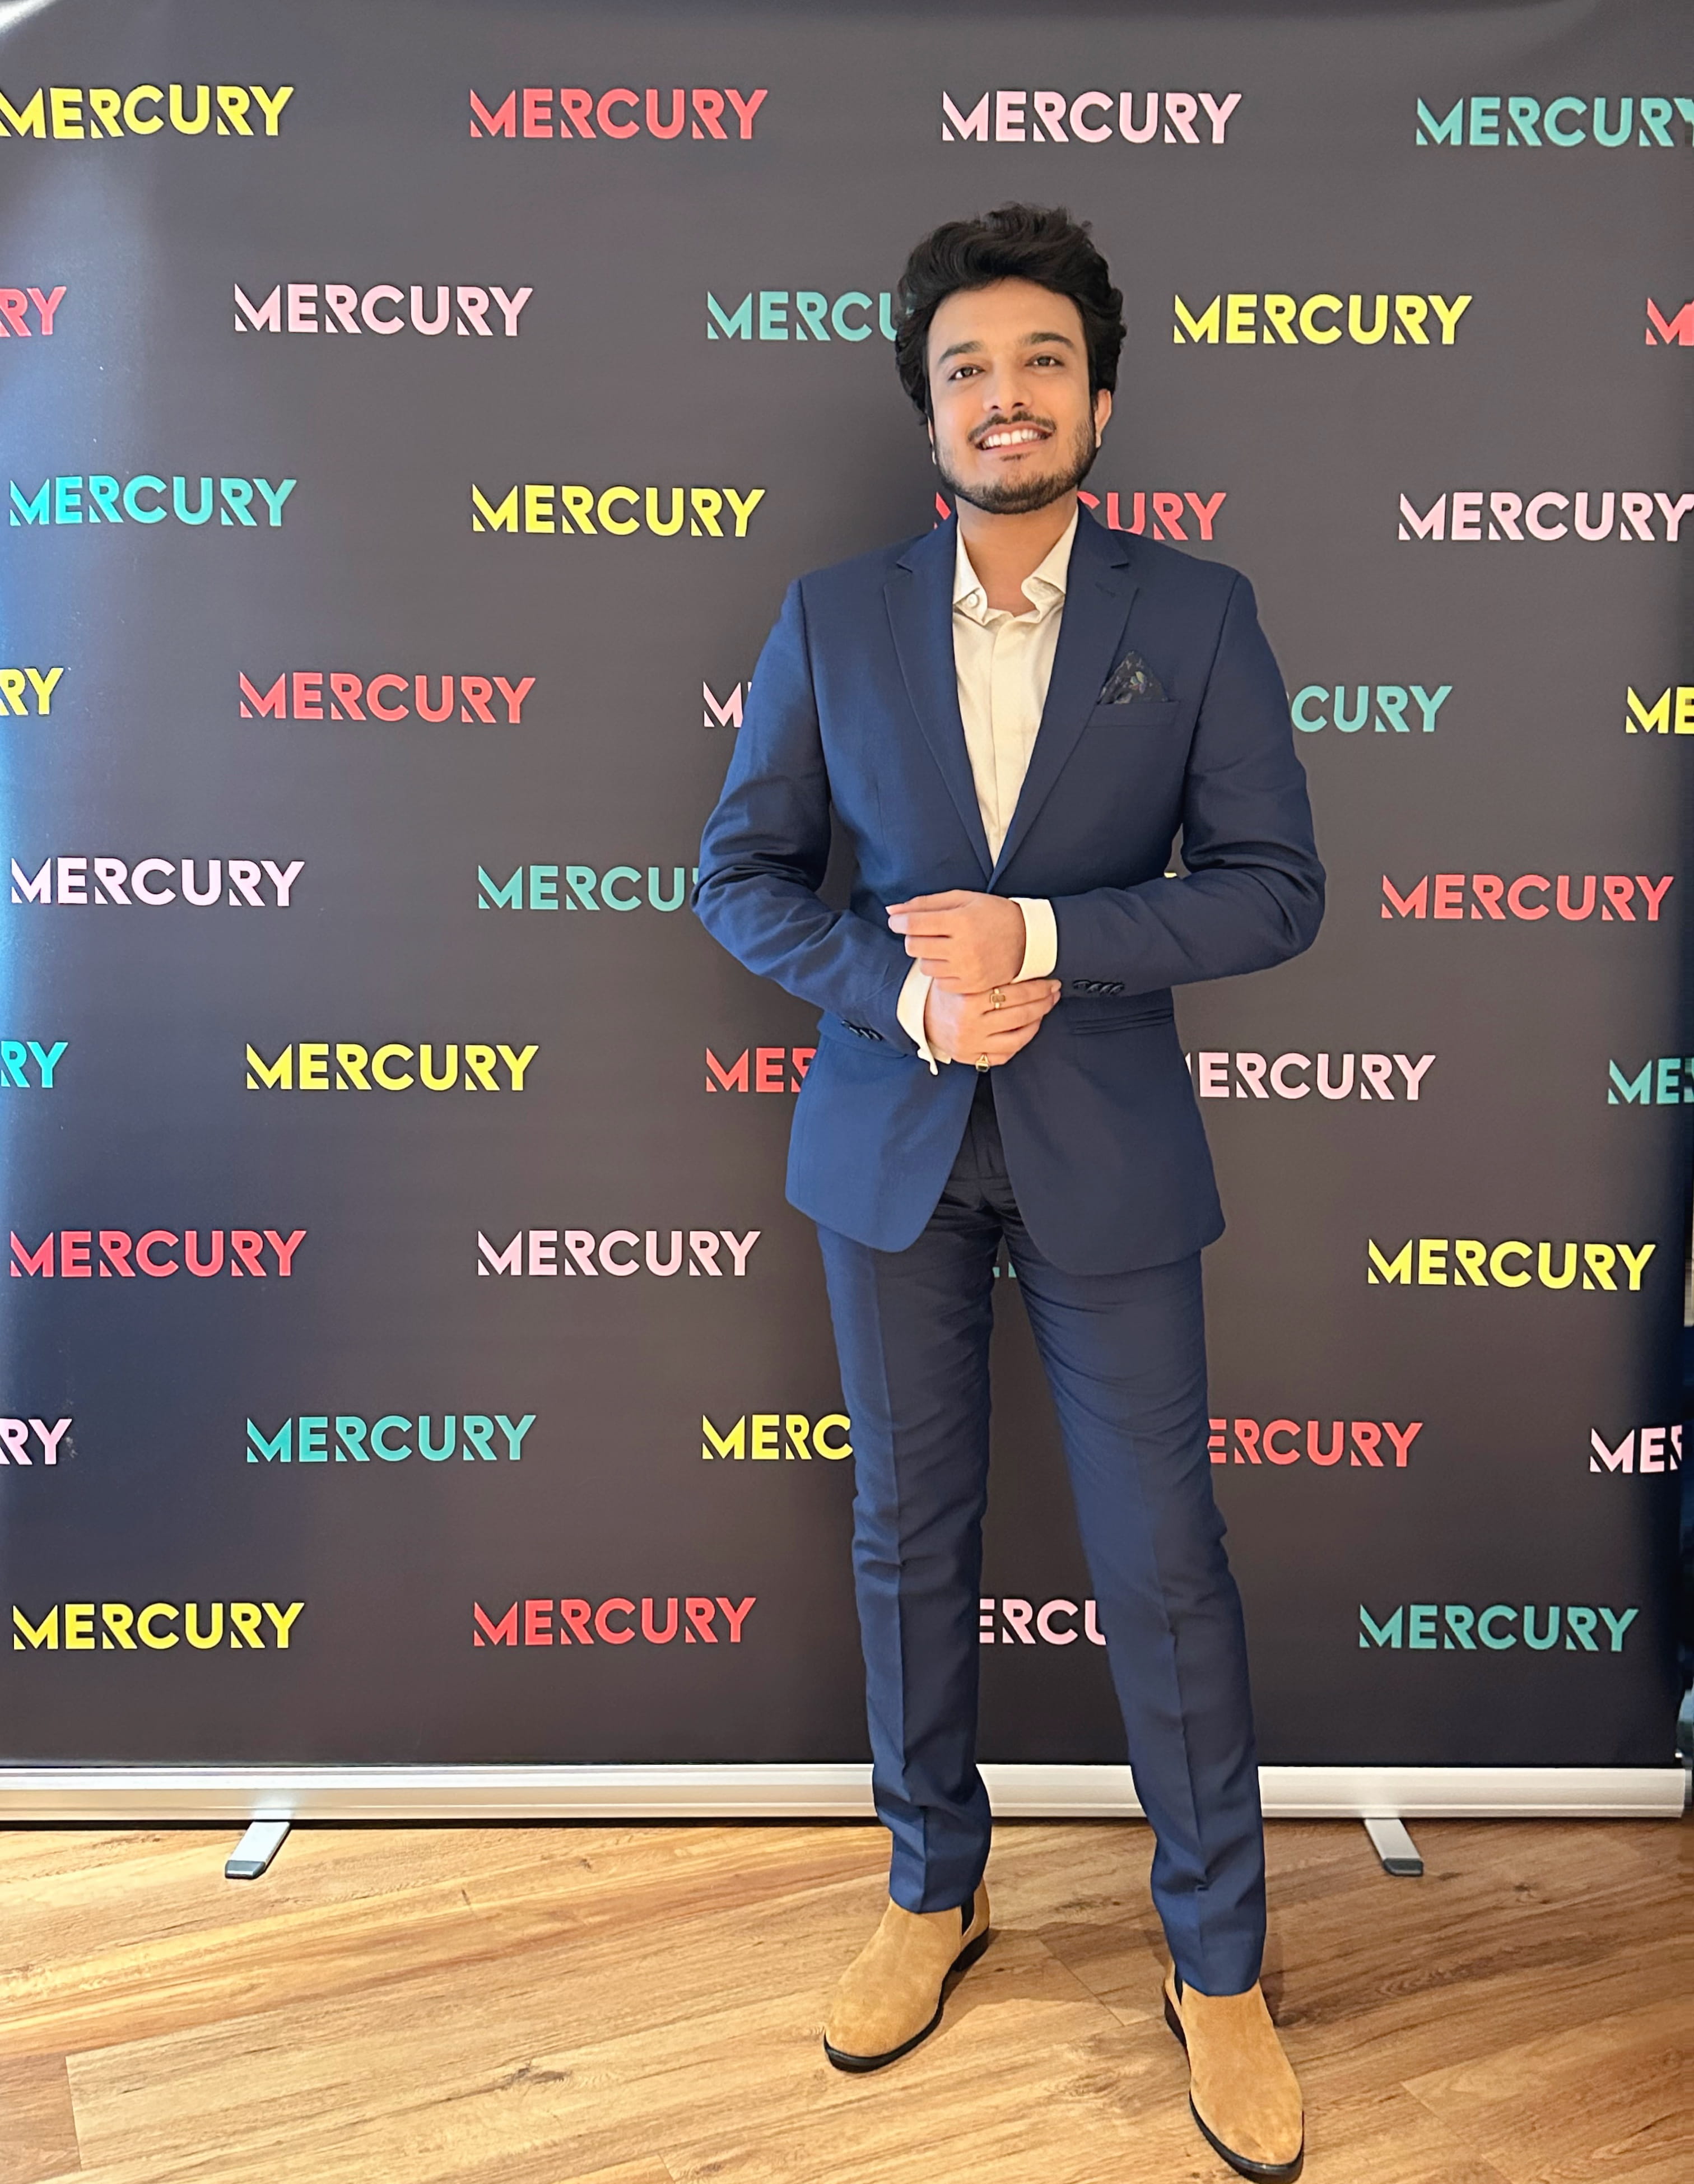 Kushal standing in front of screen that says 'mercury'